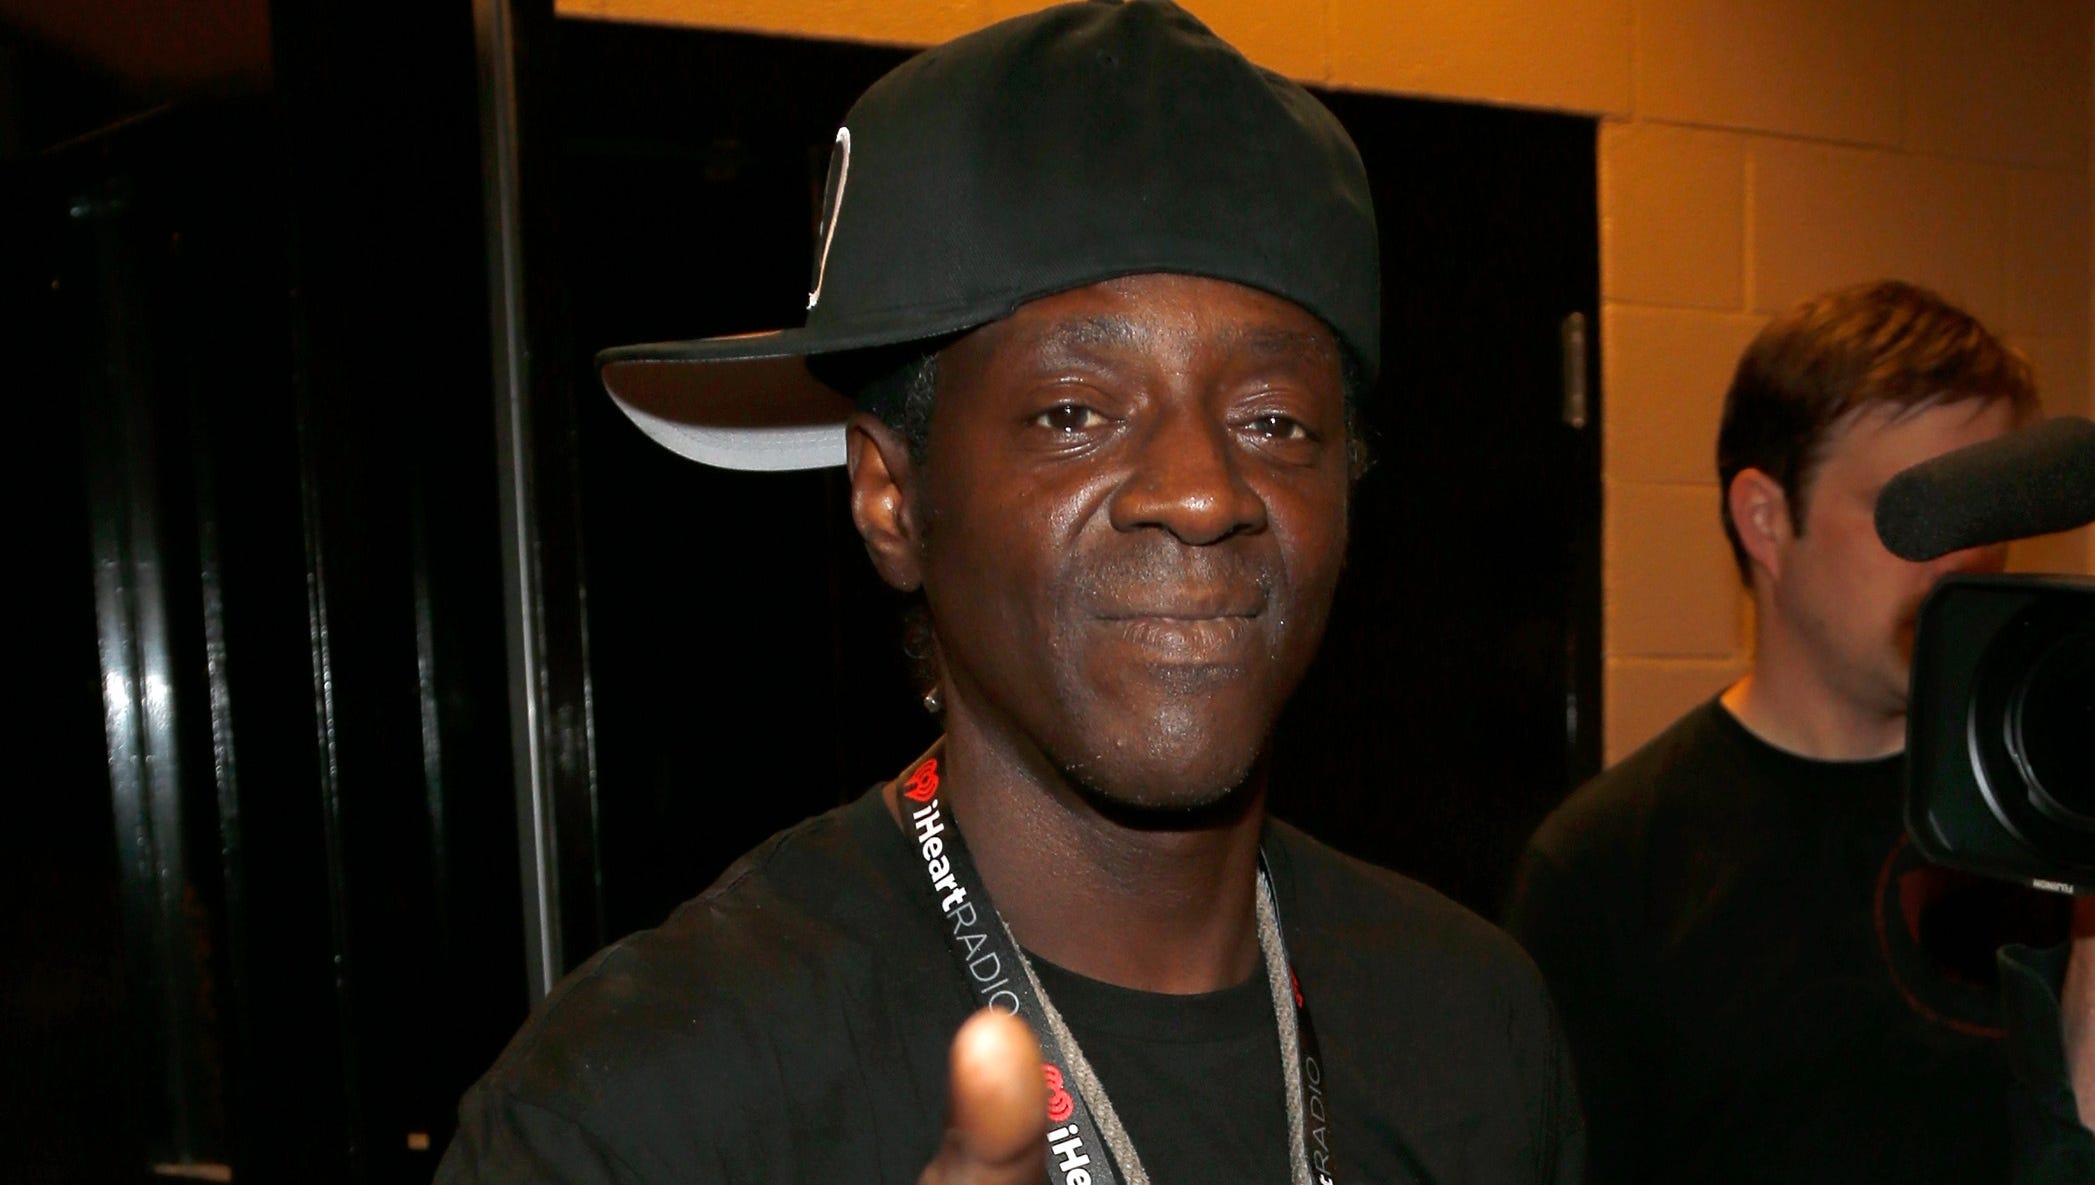 where is new york from flavor flav now